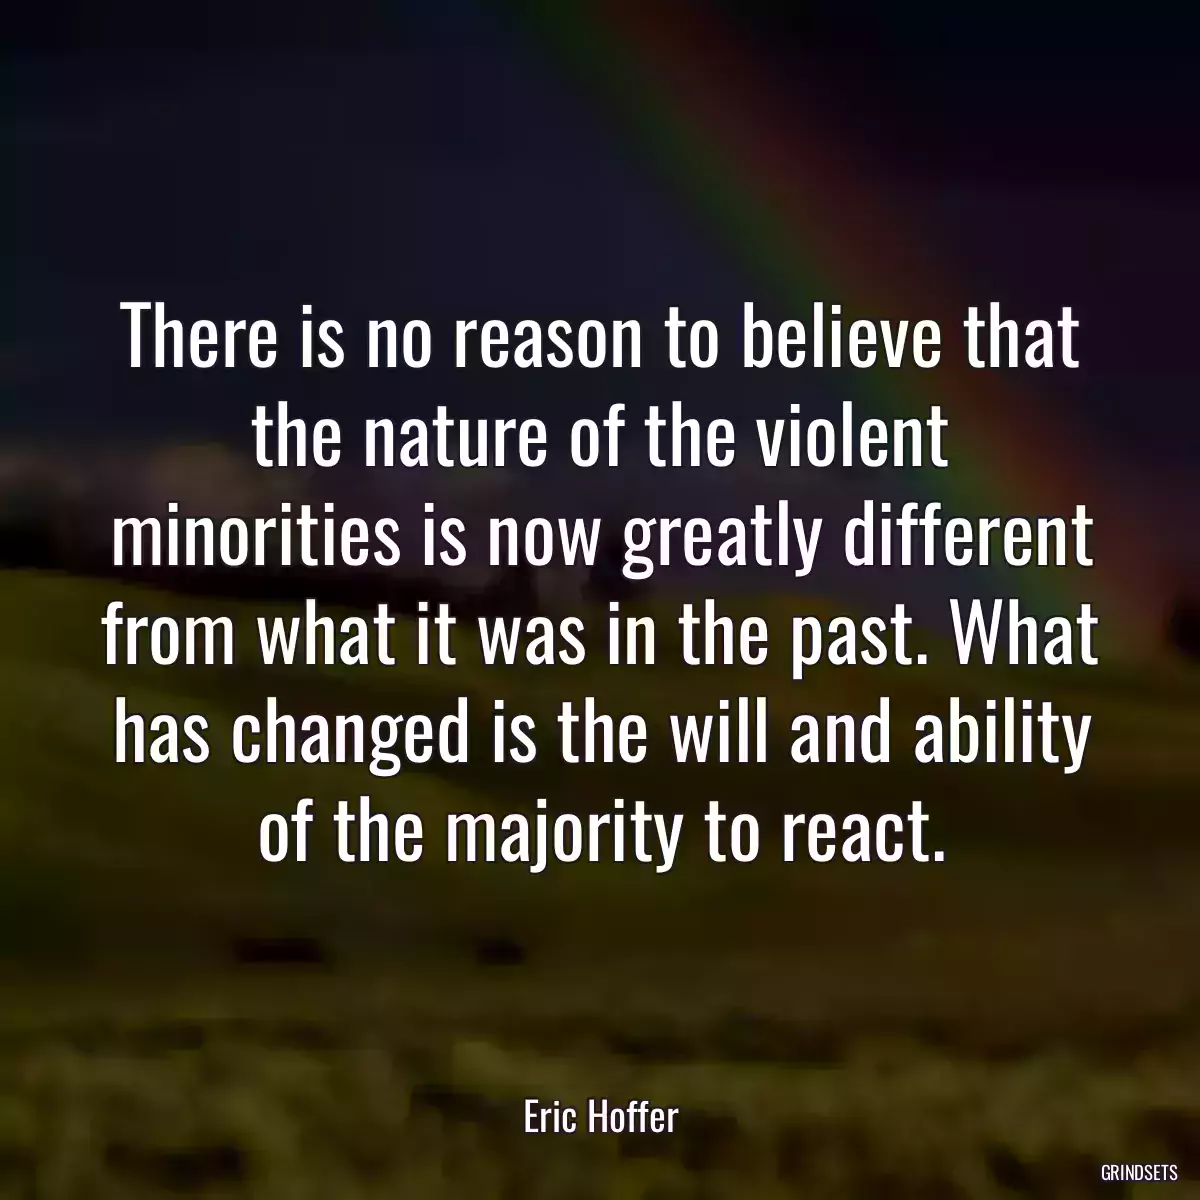 There is no reason to believe that the nature of the violent minorities is now greatly different from what it was in the past. What has changed is the will and ability of the majority to react.